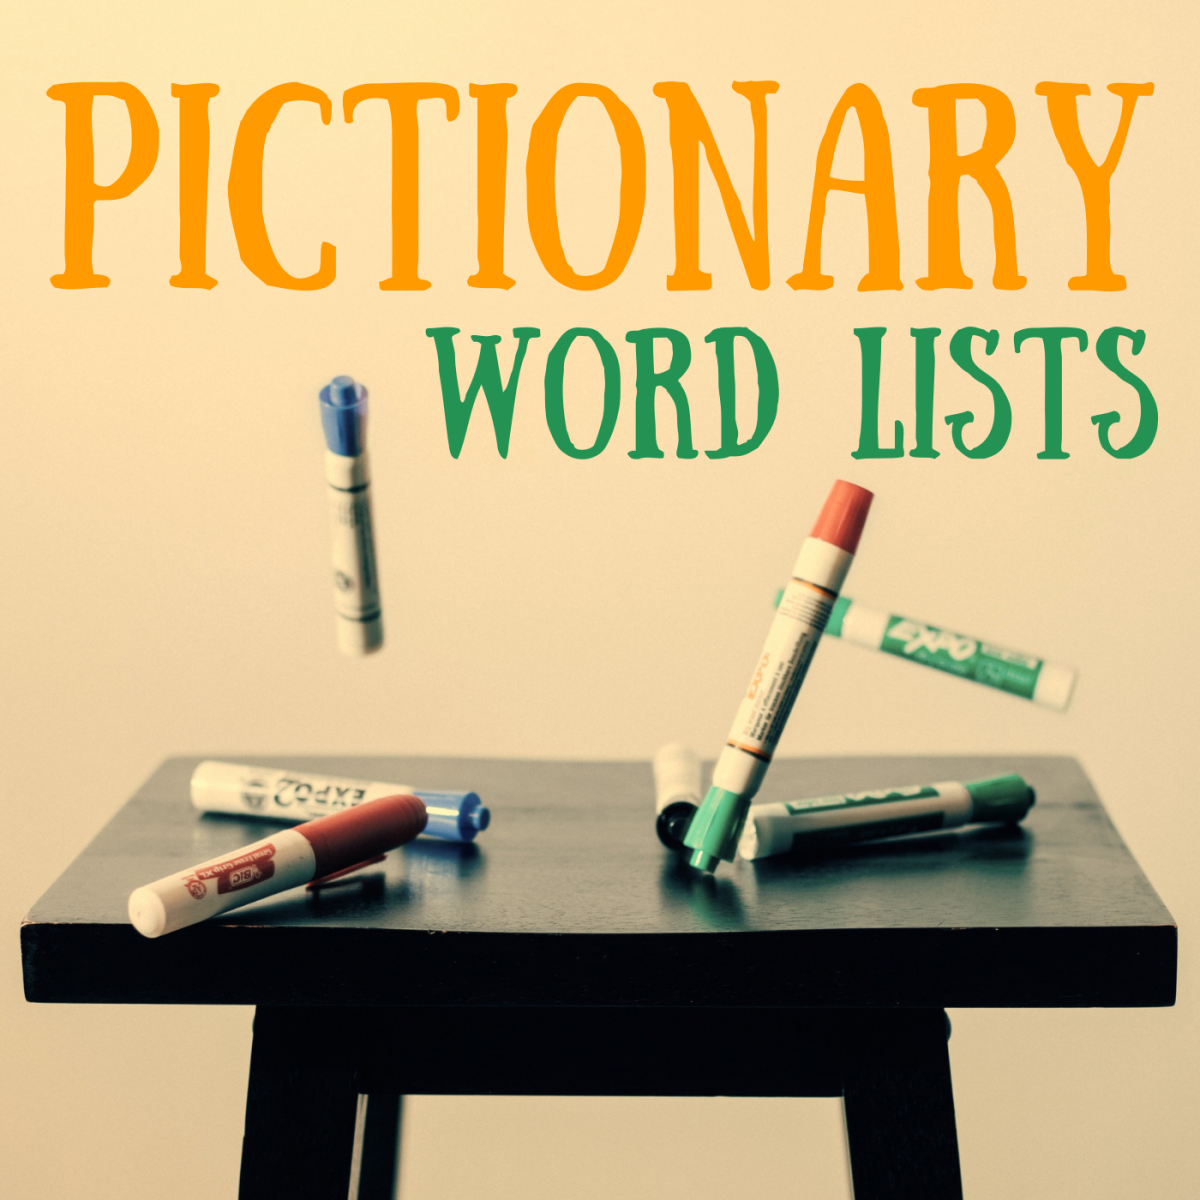 Lists of Pictionary Words: Movies, Ideas for Kids, and More